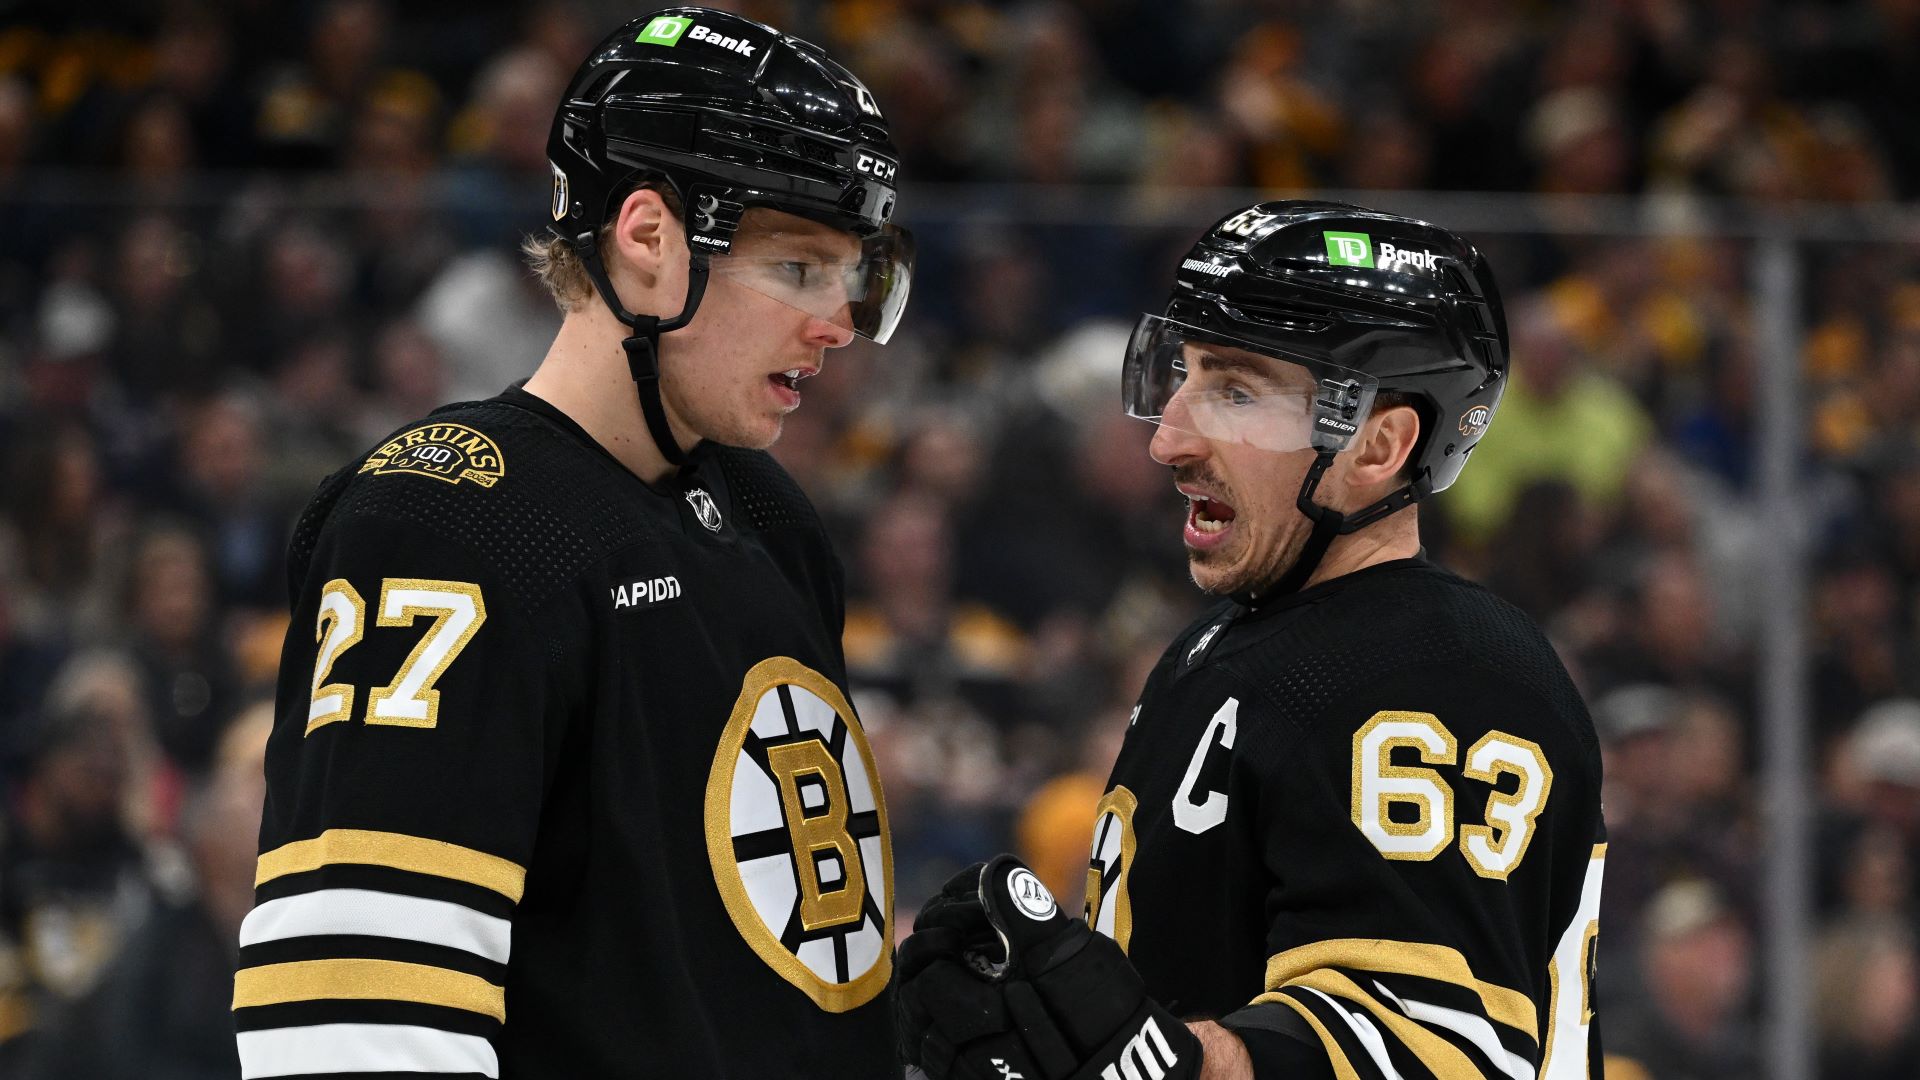 This Giving Bruins ‘Extra Motivation’ For Game 5 Against Panthers